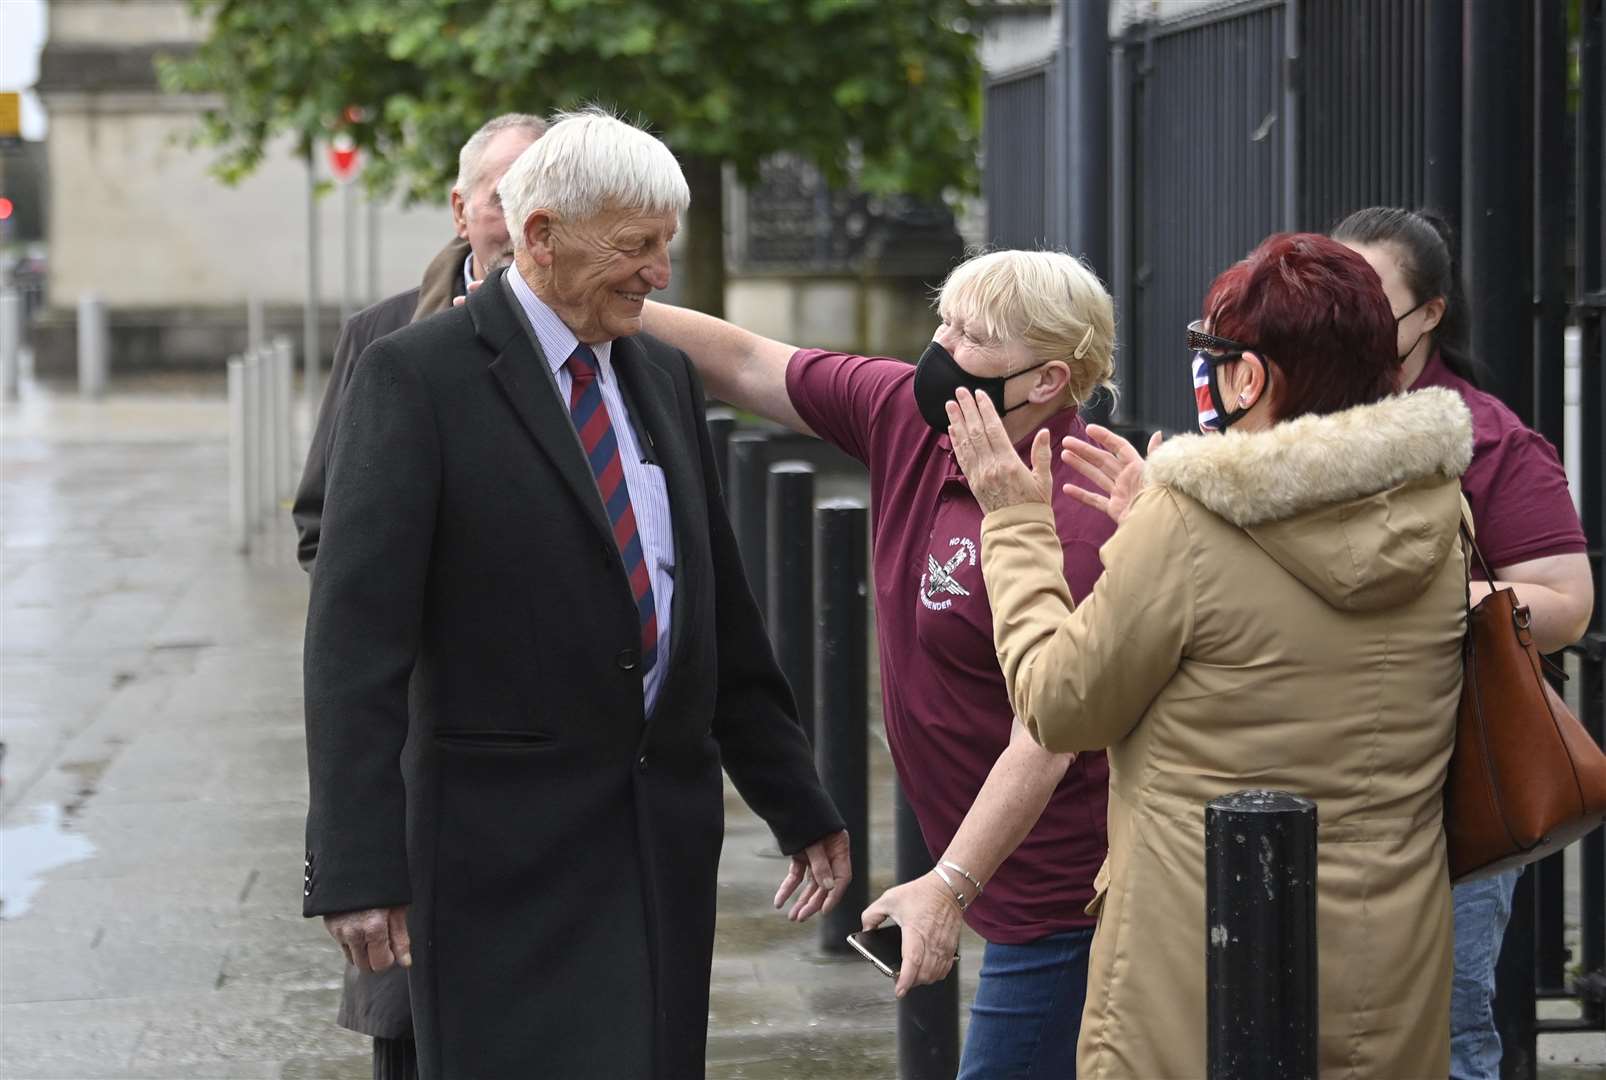 Dennis Hutchings, with supporters, arrives at Laganside Courts, Belfast (Mark Marlow/PA)